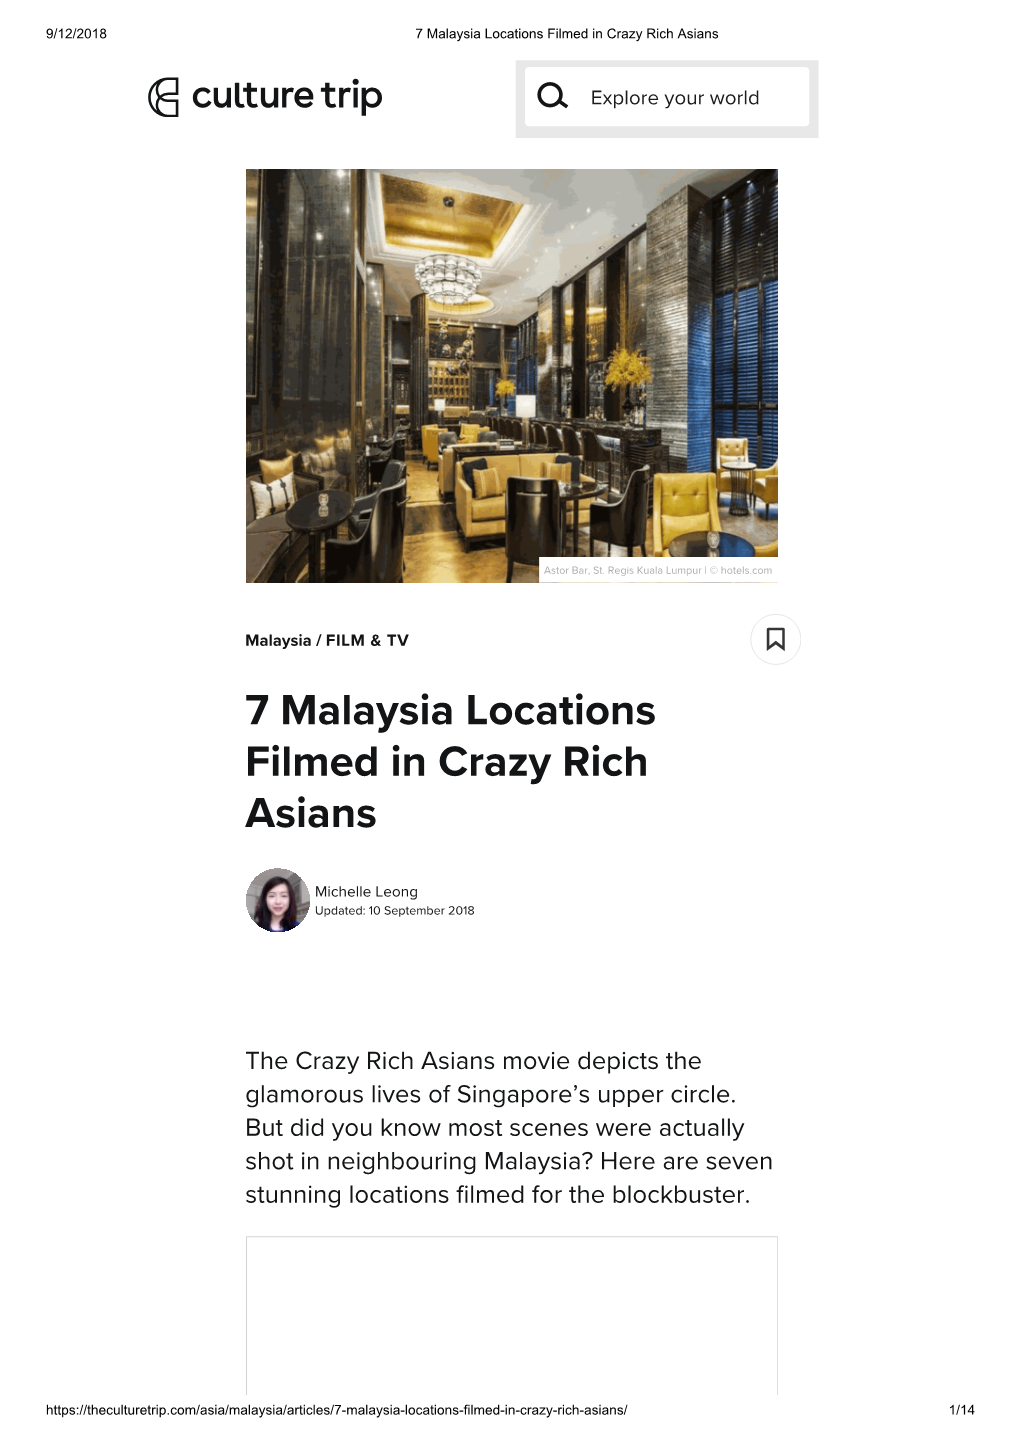 7 Malaysia Locations Filmed in Crazy Rich Asians